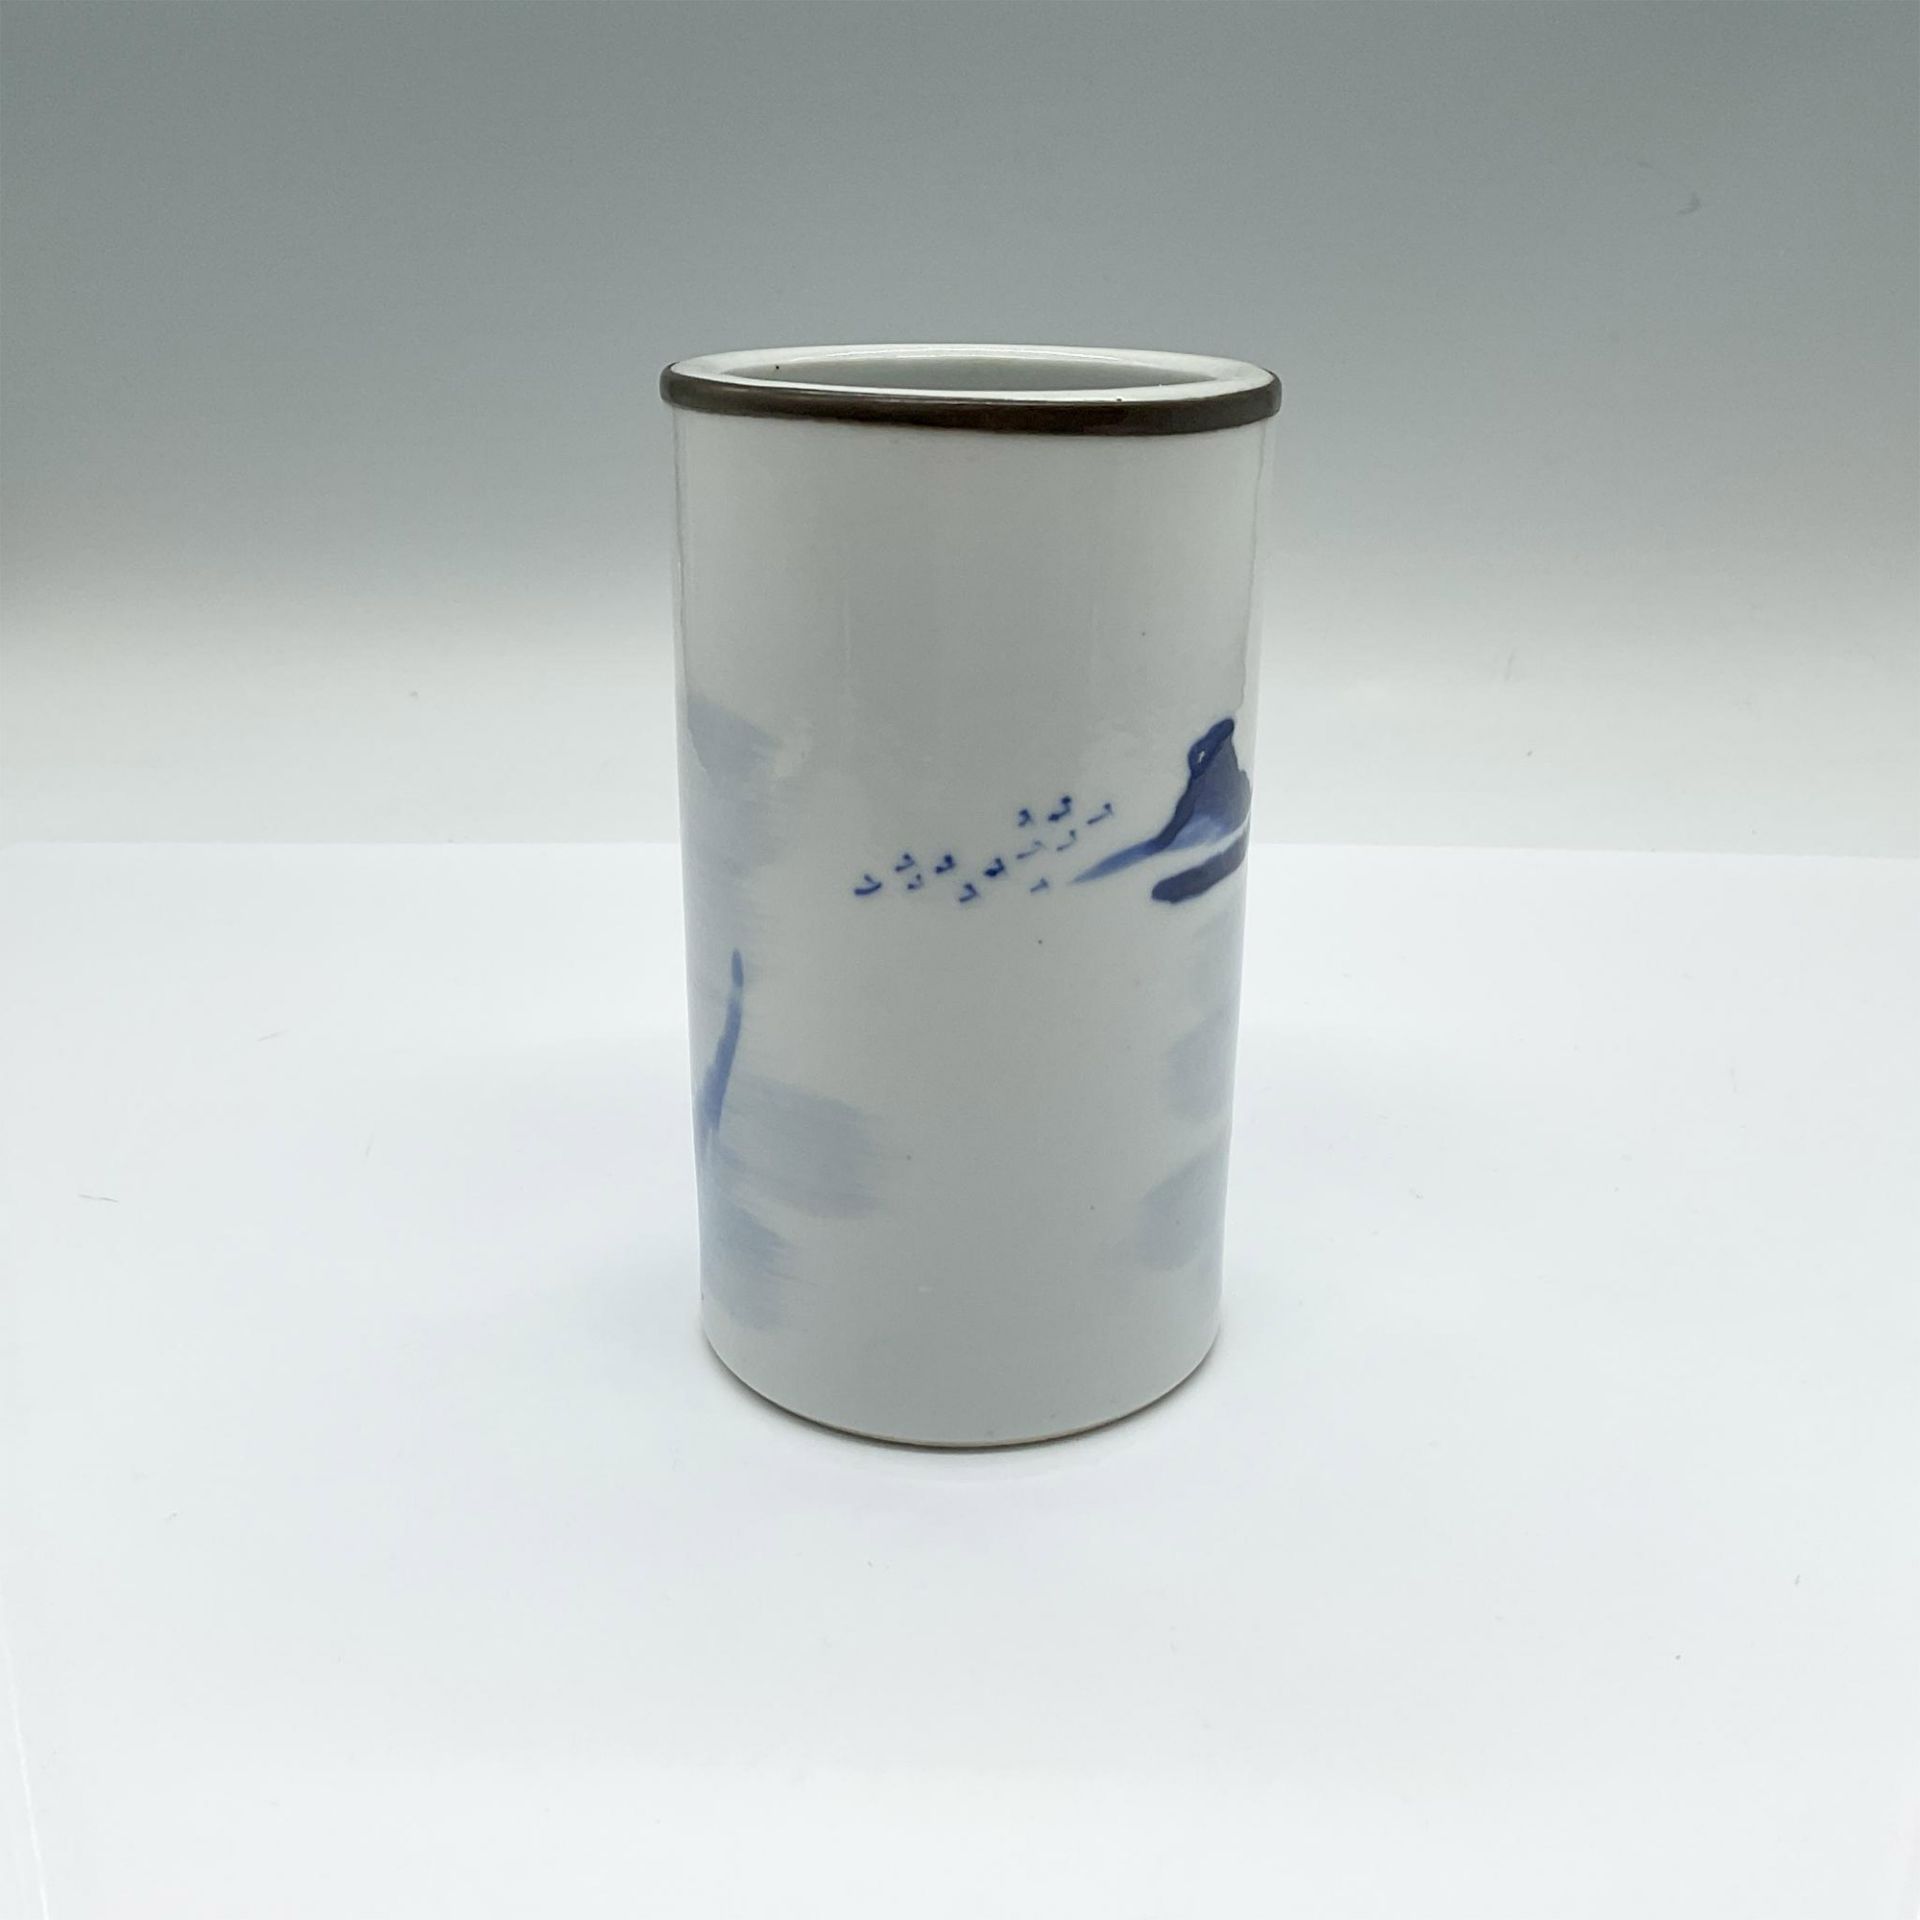 Antique Chinese Blue and White Porcelain Brush Pot - Image 2 of 4